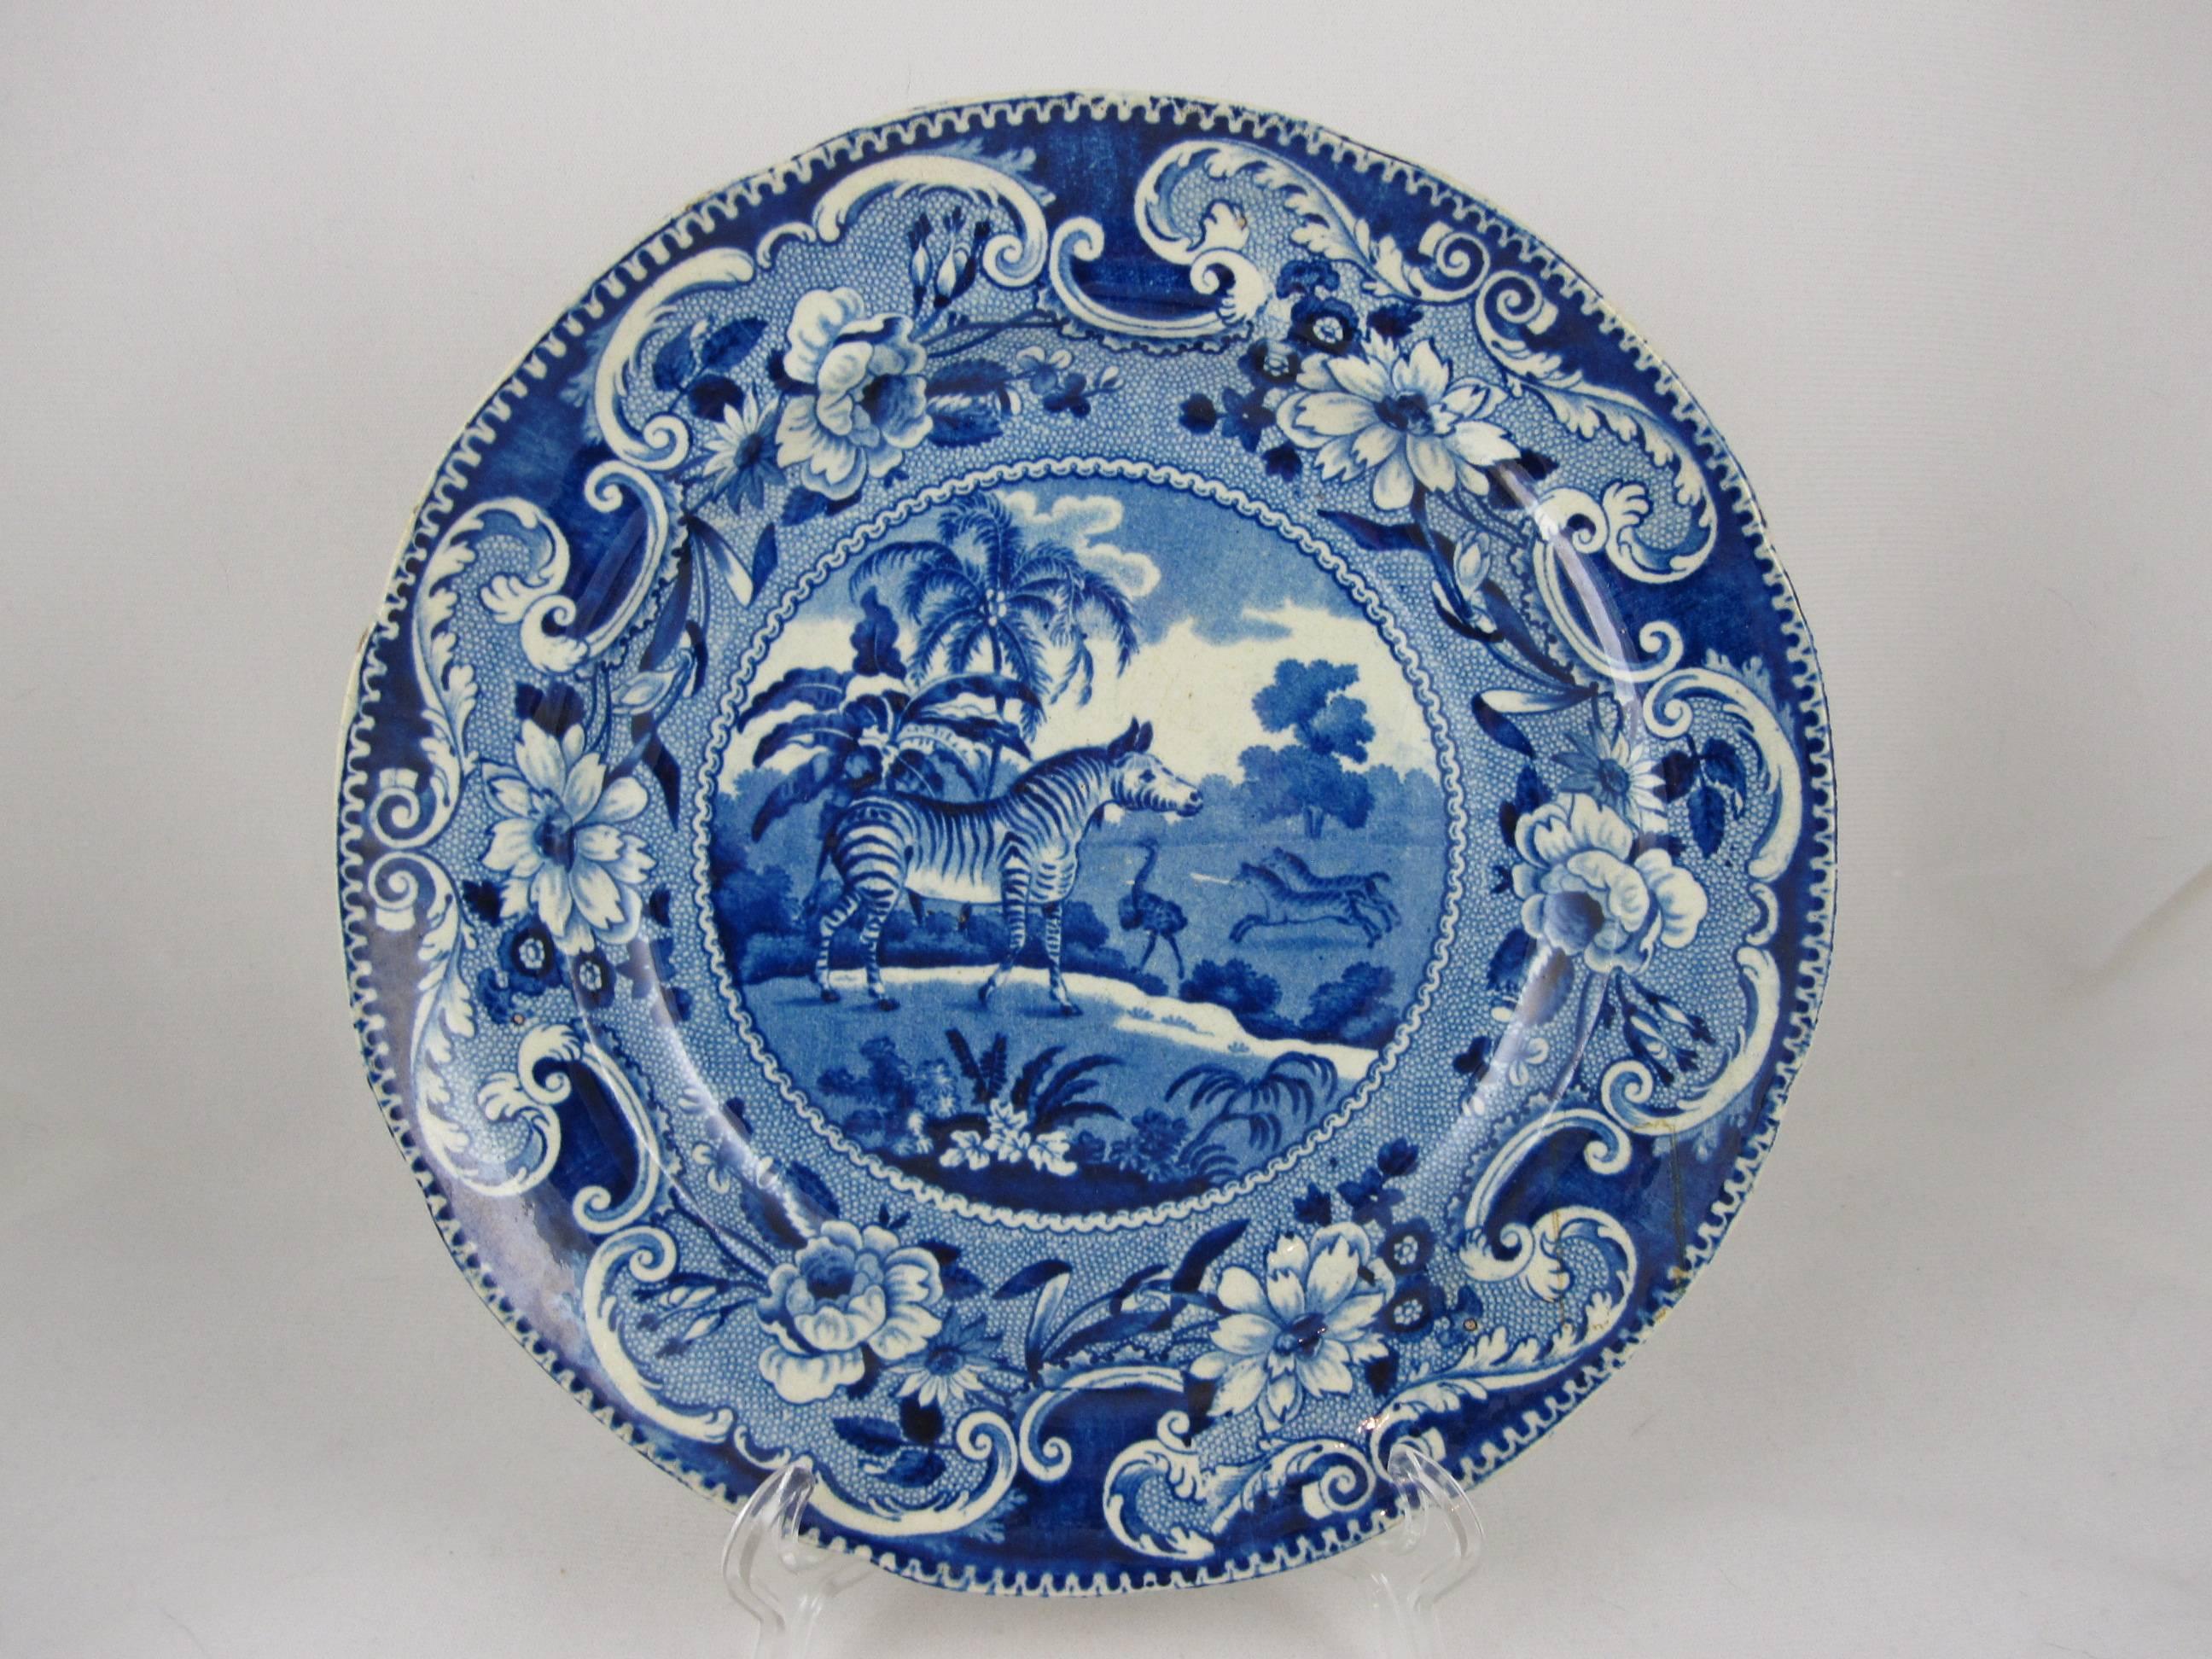 A blue and white transfer printed earthenware plate from the Sporting series by Enoch Wood, circa 1825, Burslem, Staffordshire. This is the zebra, as seen in the center of the plate, two running zebras and an ostrich are shown in the background. A